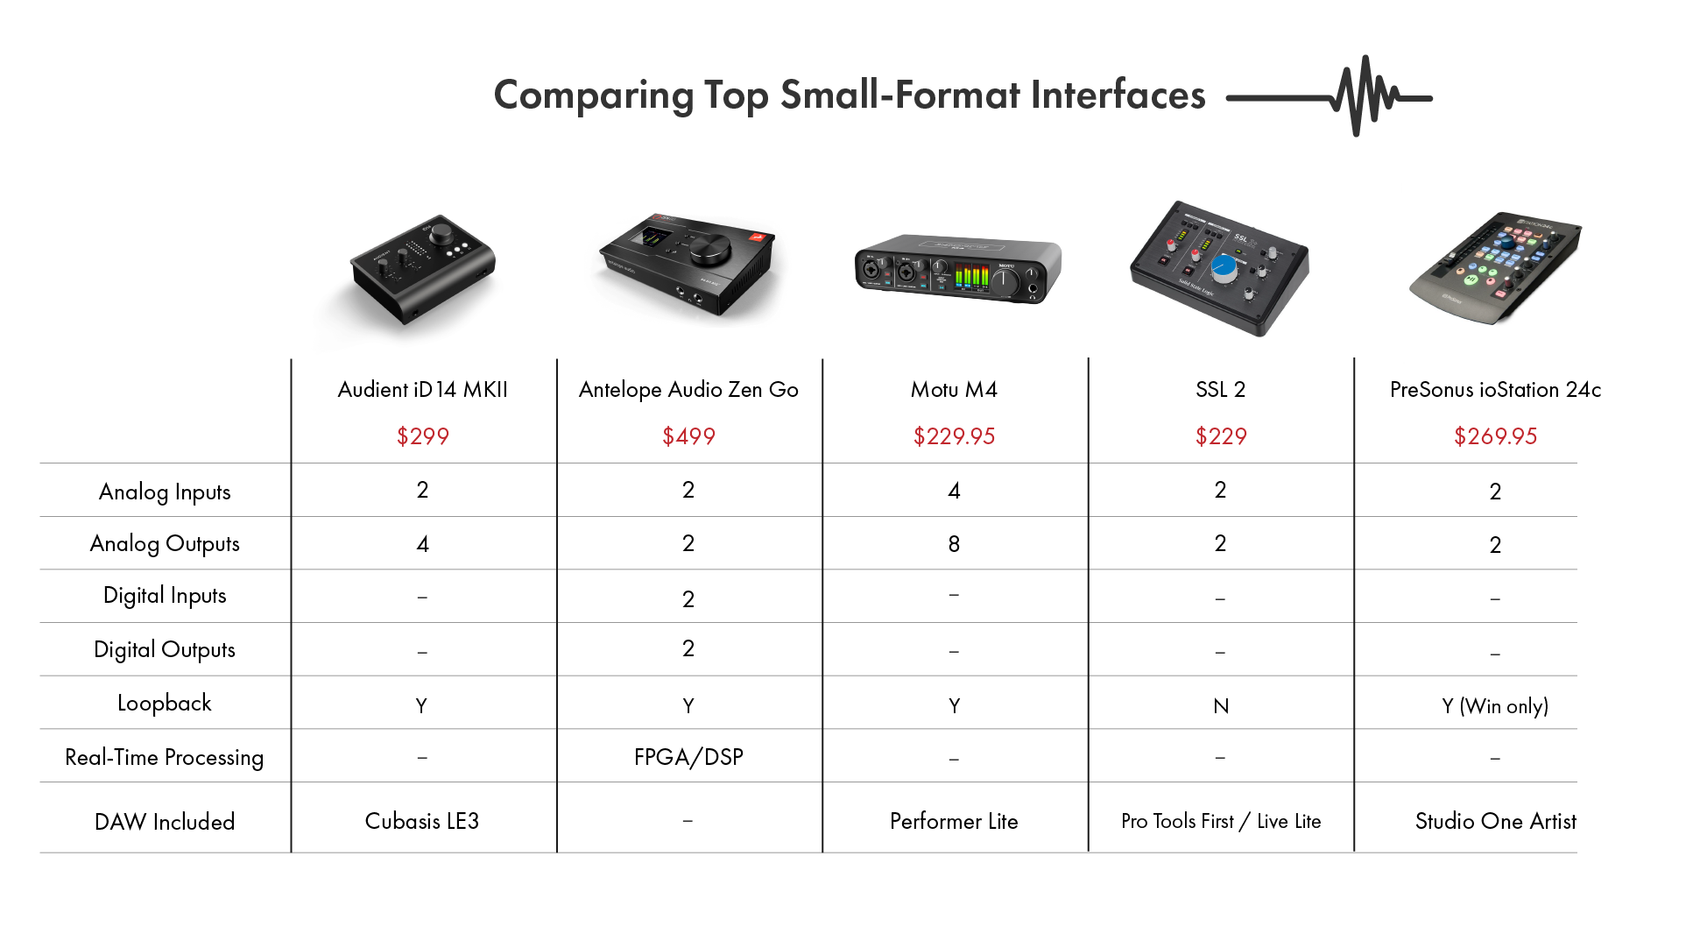 Best Small-Format Interfaces in 2021